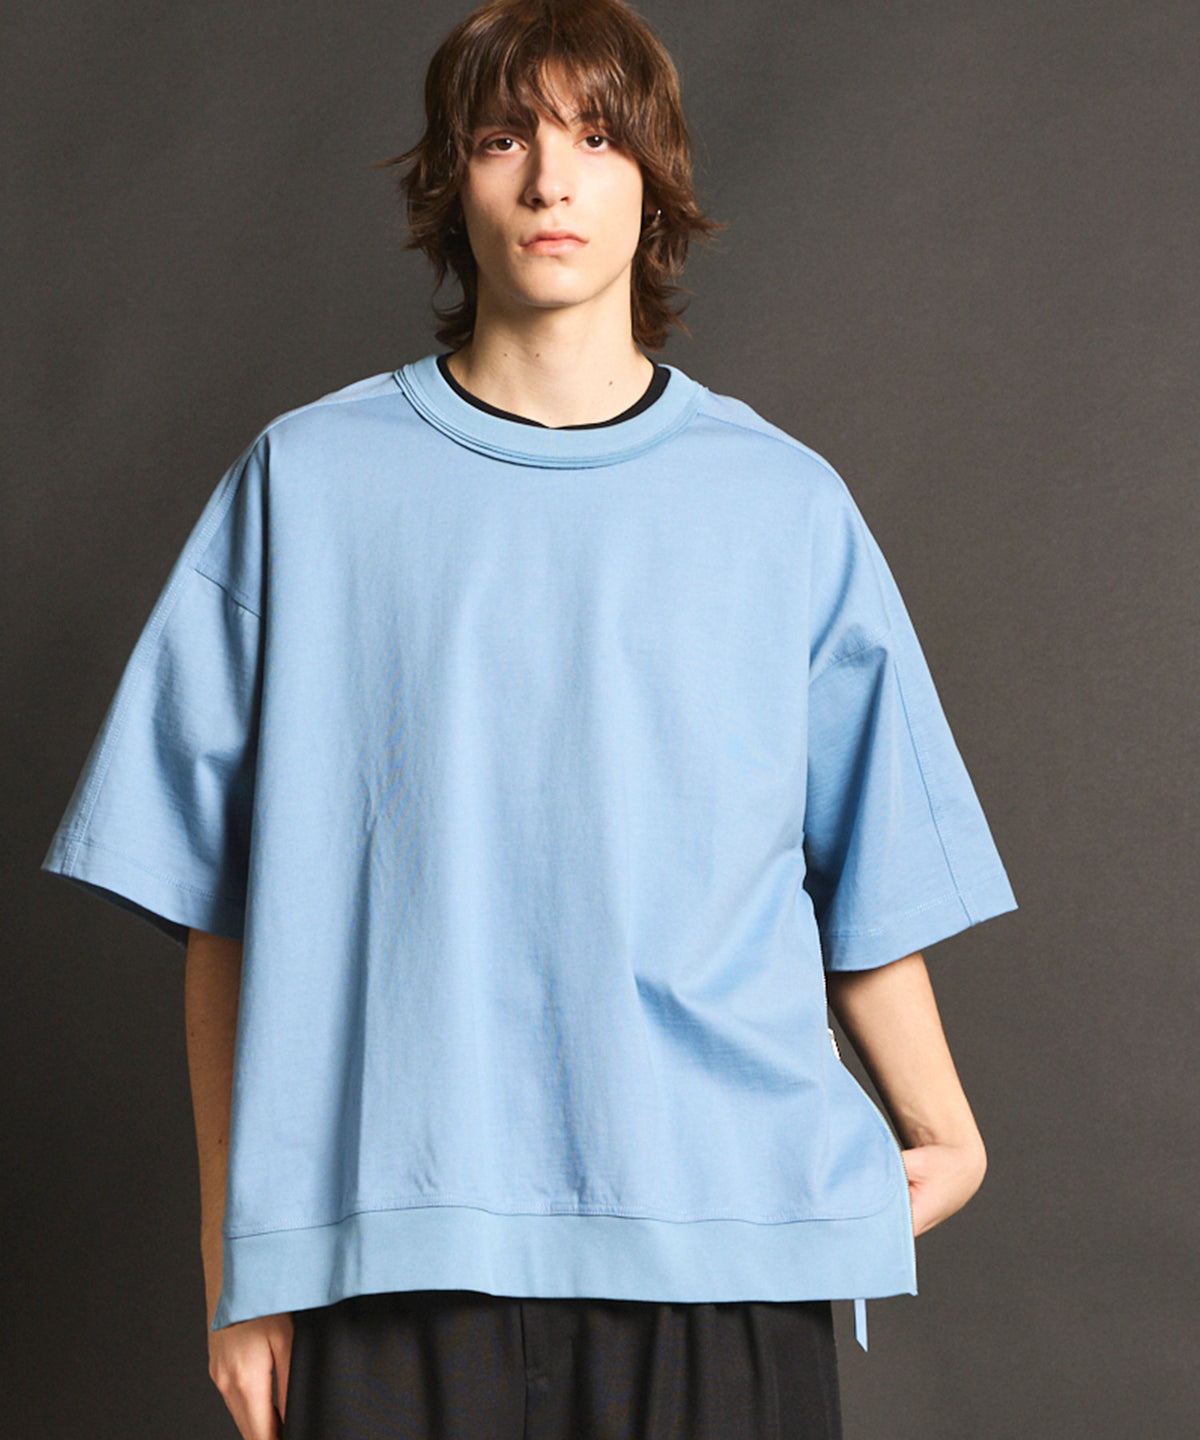 Heavy-Weight Cotton Prime-Over Side Zip T-Shirts